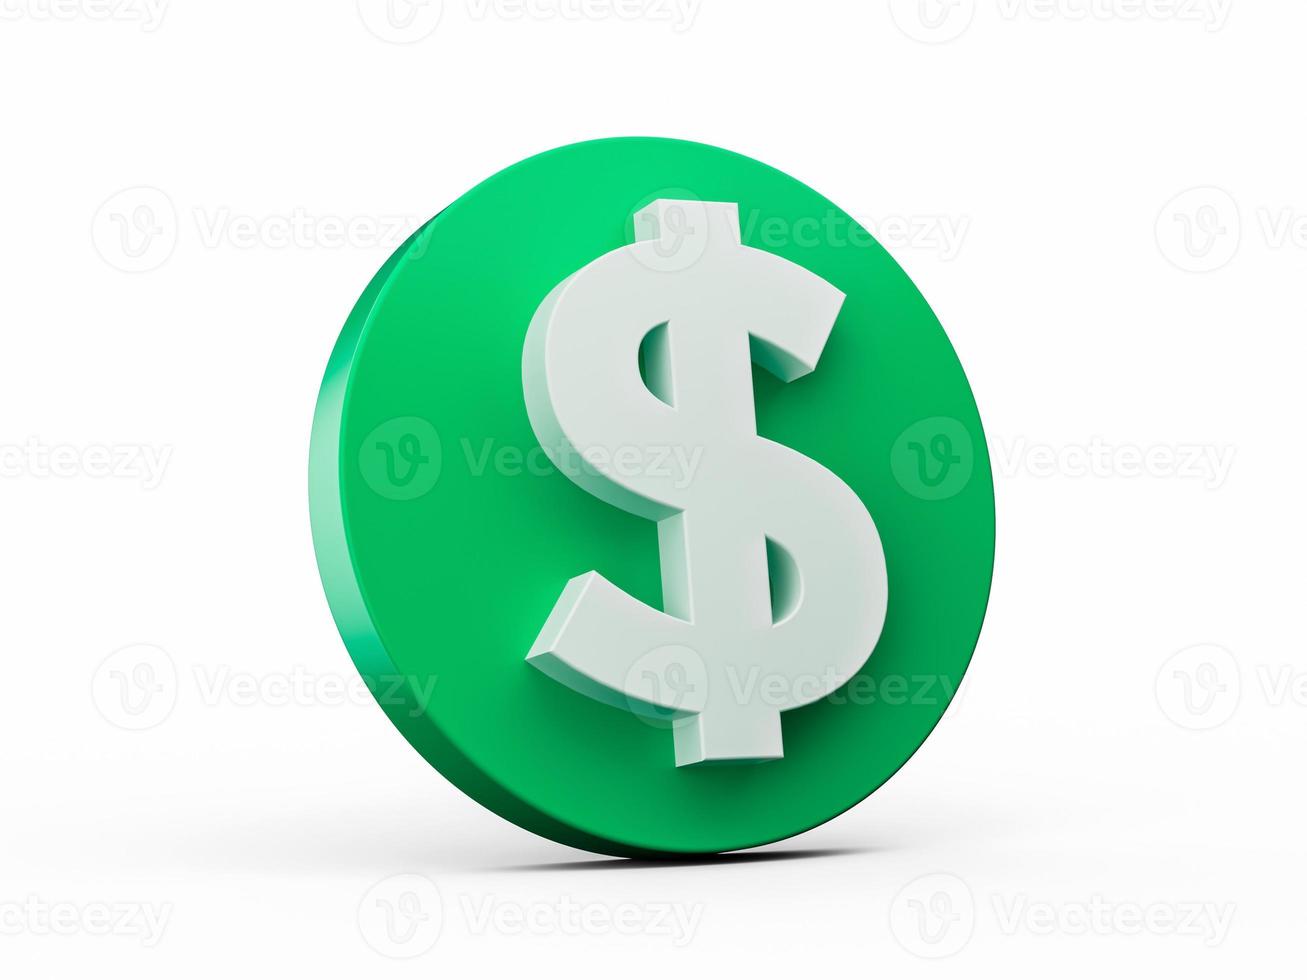 Dollar Sign Isolated Dolar symbol on Round green icon 3D rendering photo